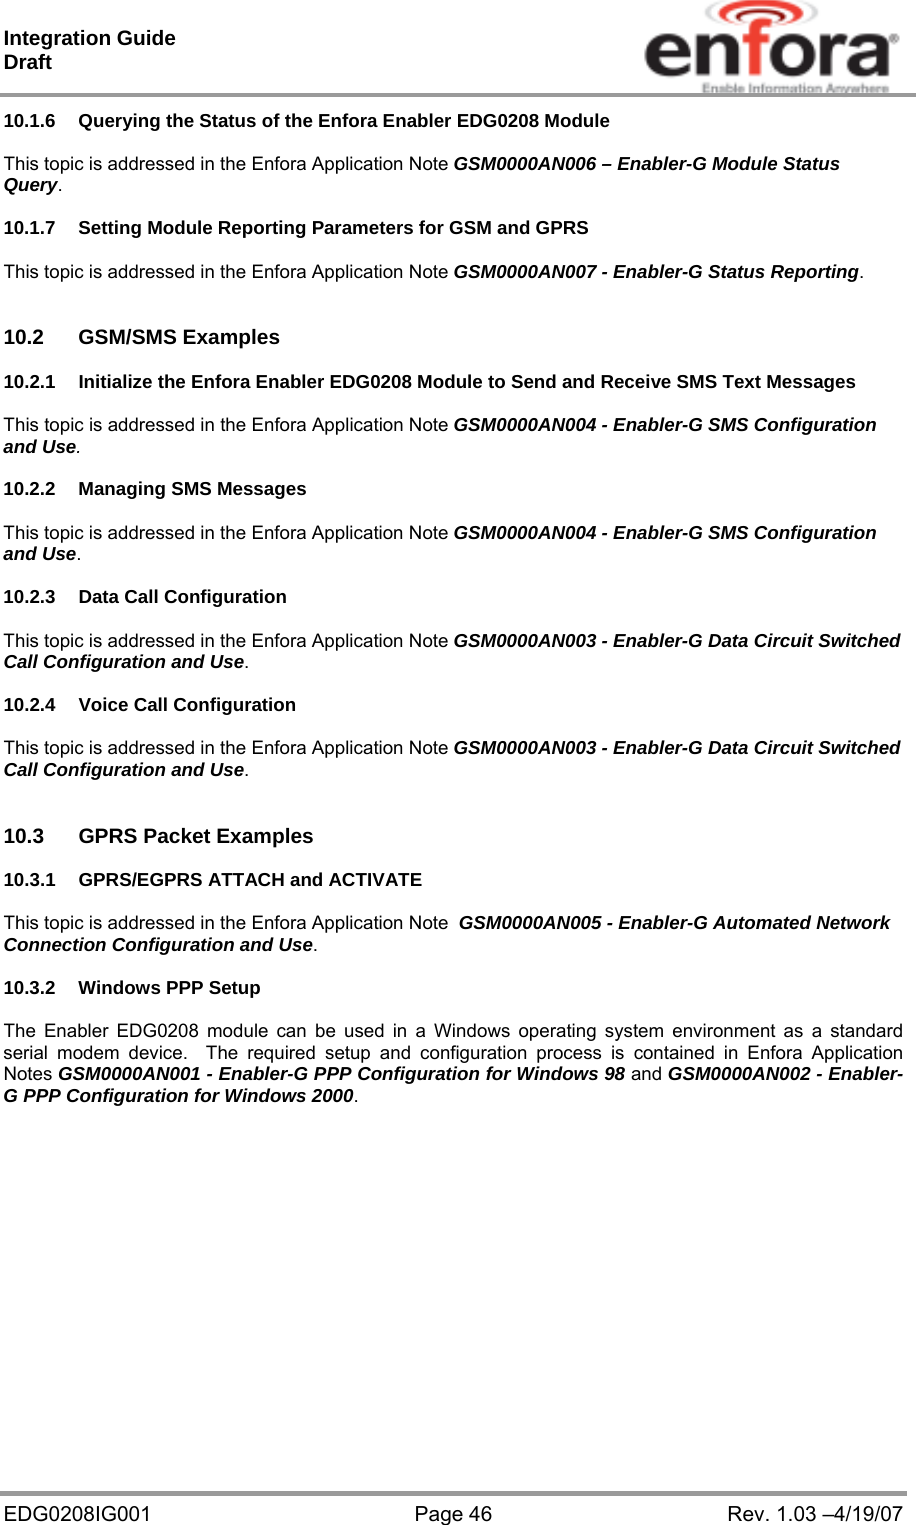 Integration Guide  Draft EDG0208IG001  Page 46  Rev. 1.03 –4/19/07 10.1.6  Querying the Status of the Enfora Enabler EDG0208 Module  This topic is addressed in the Enfora Application Note GSM0000AN006 – Enabler-G Module Status Query.  10.1.7  Setting Module Reporting Parameters for GSM and GPRS  This topic is addressed in the Enfora Application Note GSM0000AN007 - Enabler-G Status Reporting.   10.2 GSM/SMS Examples  10.2.1  Initialize the Enfora Enabler EDG0208 Module to Send and Receive SMS Text Messages  This topic is addressed in the Enfora Application Note GSM0000AN004 - Enabler-G SMS Configuration and Use.  10.2.2  Managing SMS Messages  This topic is addressed in the Enfora Application Note GSM0000AN004 - Enabler-G SMS Configuration and Use.  10.2.3  Data Call Configuration  This topic is addressed in the Enfora Application Note GSM0000AN003 - Enabler-G Data Circuit Switched Call Configuration and Use.  10.2.4  Voice Call Configuration  This topic is addressed in the Enfora Application Note GSM0000AN003 - Enabler-G Data Circuit Switched Call Configuration and Use.   10.3  GPRS Packet Examples  10.3.1  GPRS/EGPRS ATTACH and ACTIVATE  This topic is addressed in the Enfora Application Note  GSM0000AN005 - Enabler-G Automated Network Connection Configuration and Use.  10.3.2  Windows PPP Setup  The Enabler EDG0208 module can be used in a Windows operating system environment as a standard serial modem device.  The required setup and configuration process is contained in Enfora Application Notes GSM0000AN001 - Enabler-G PPP Configuration for Windows 98 and GSM0000AN002 - Enabler-G PPP Configuration for Windows 2000.     